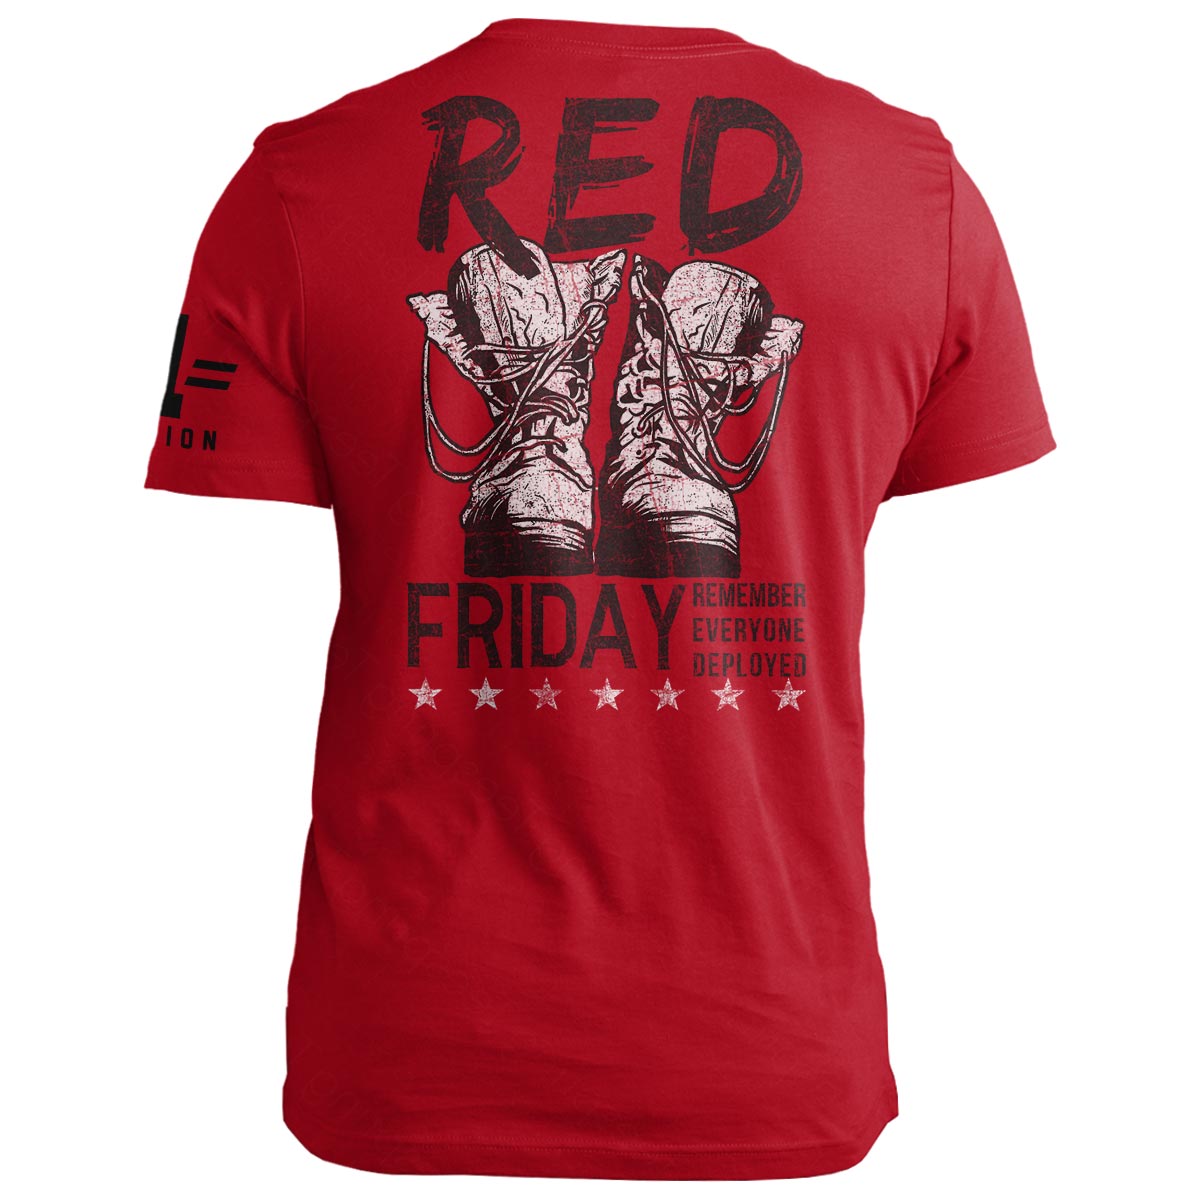 Red Friday: Remember Everyone Deployed